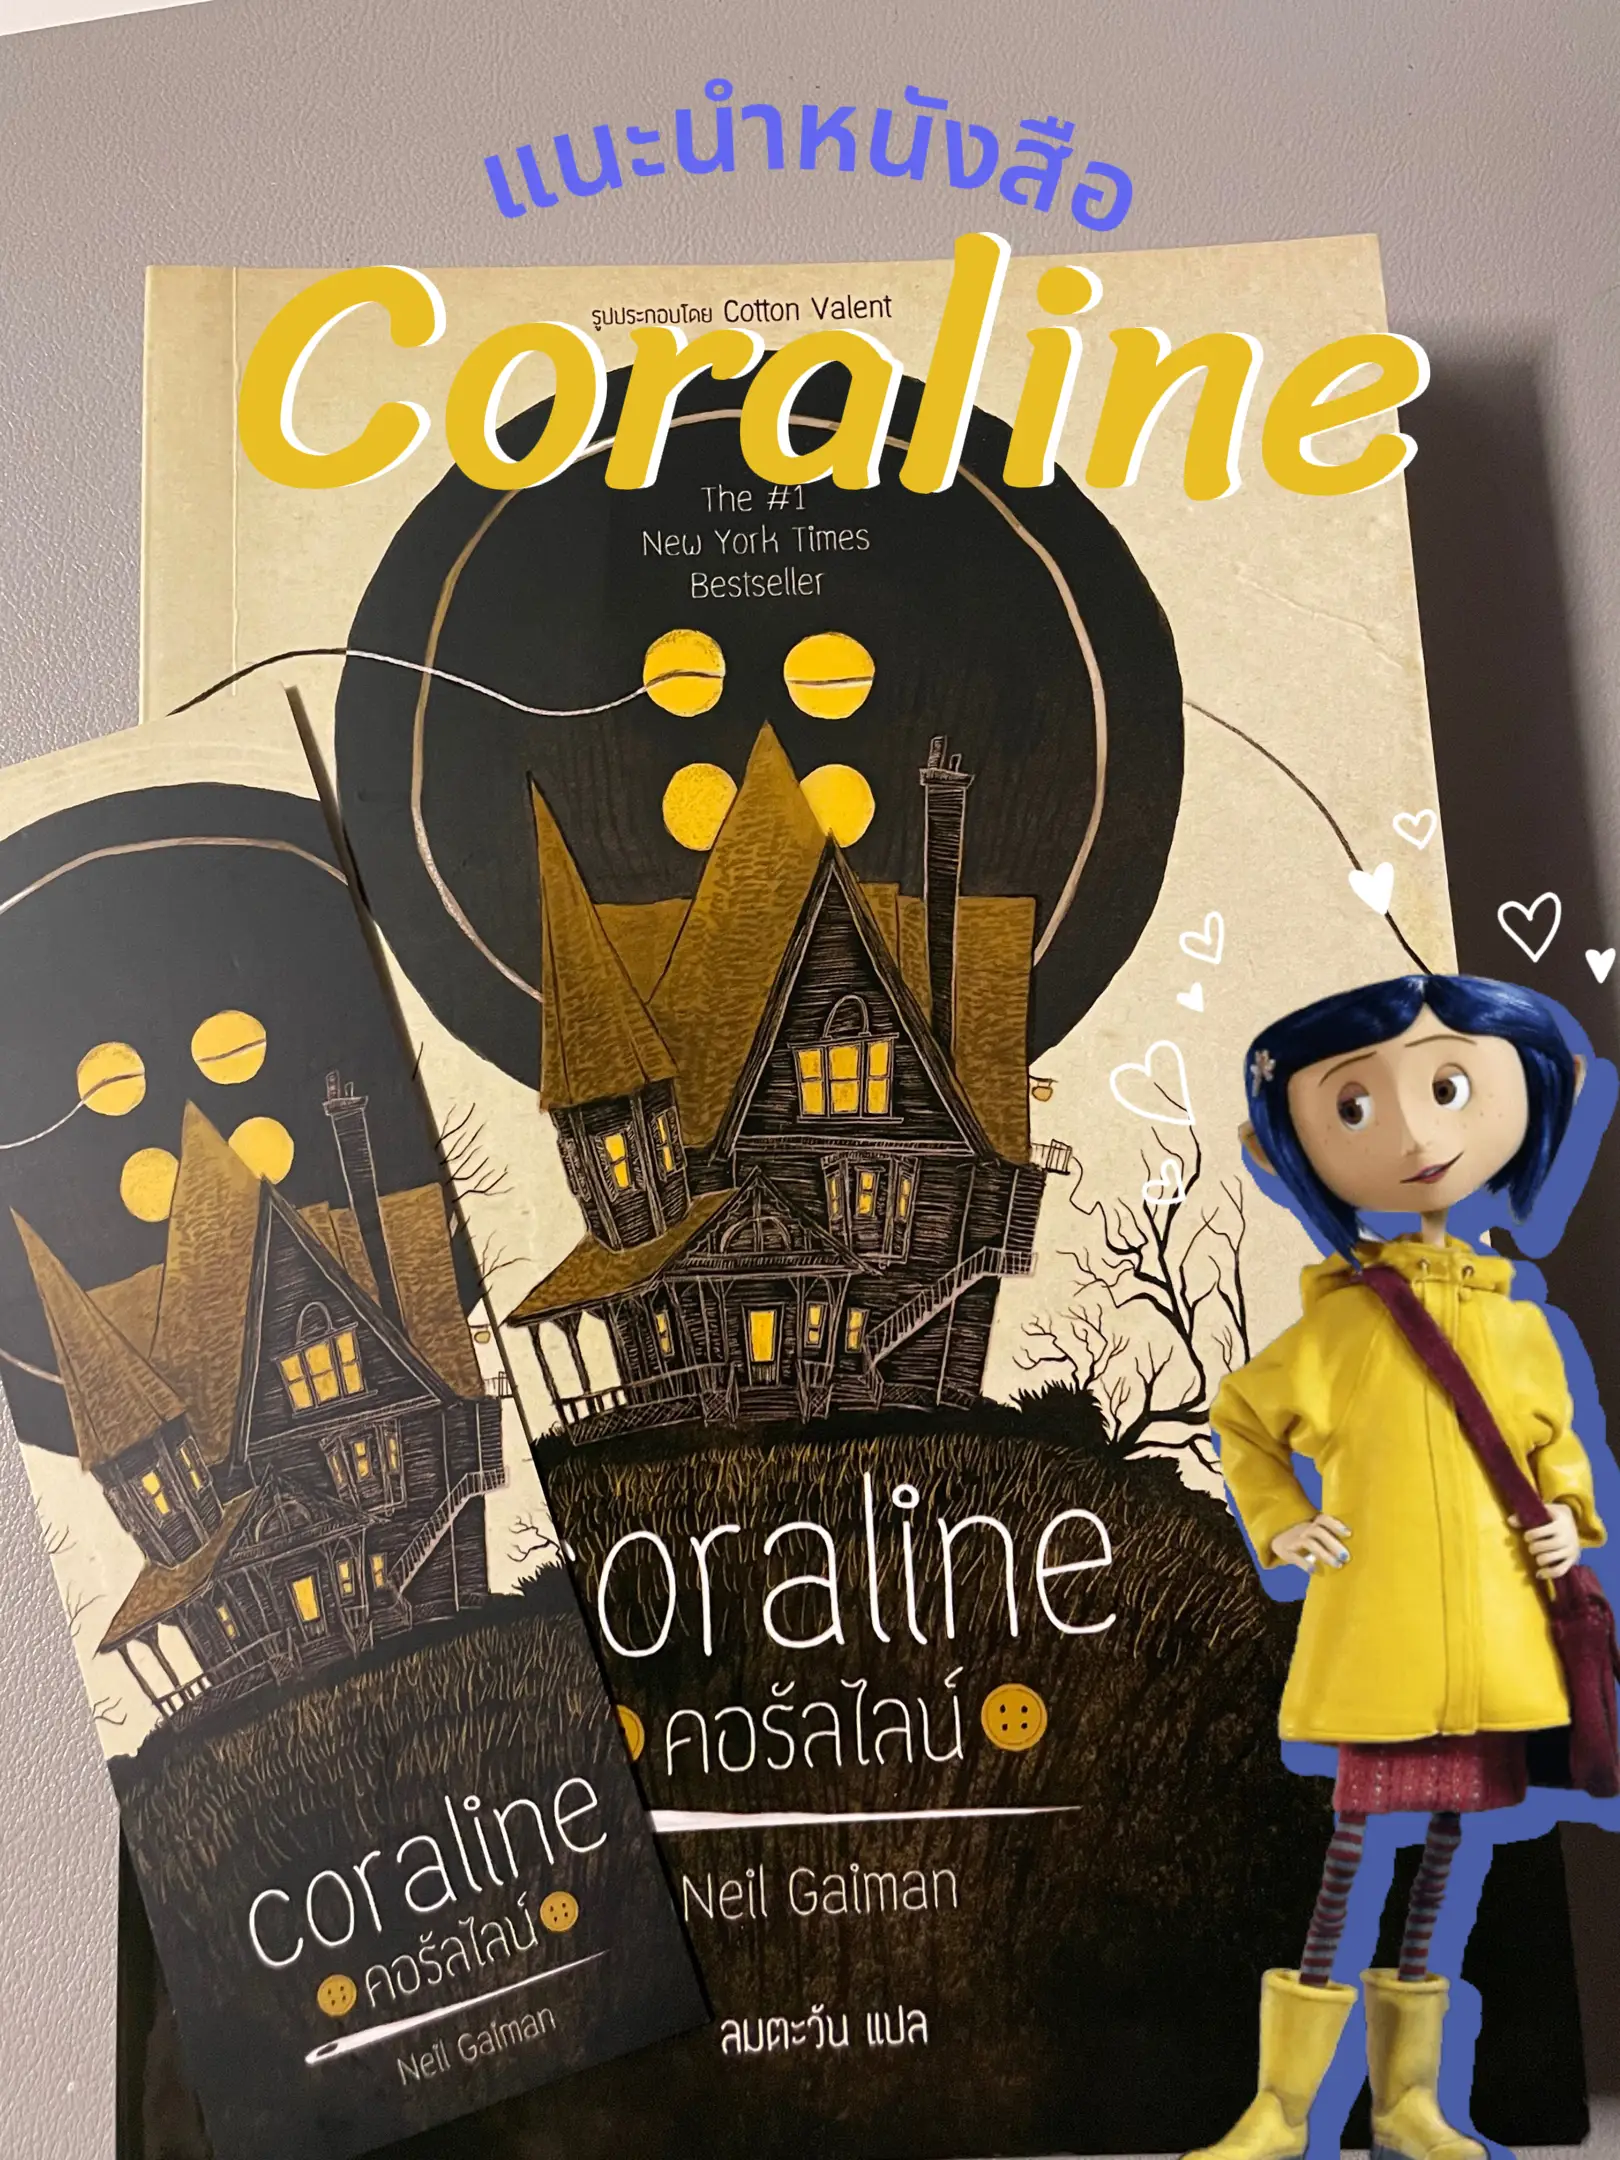 Introducing the book Coraline Coral Line